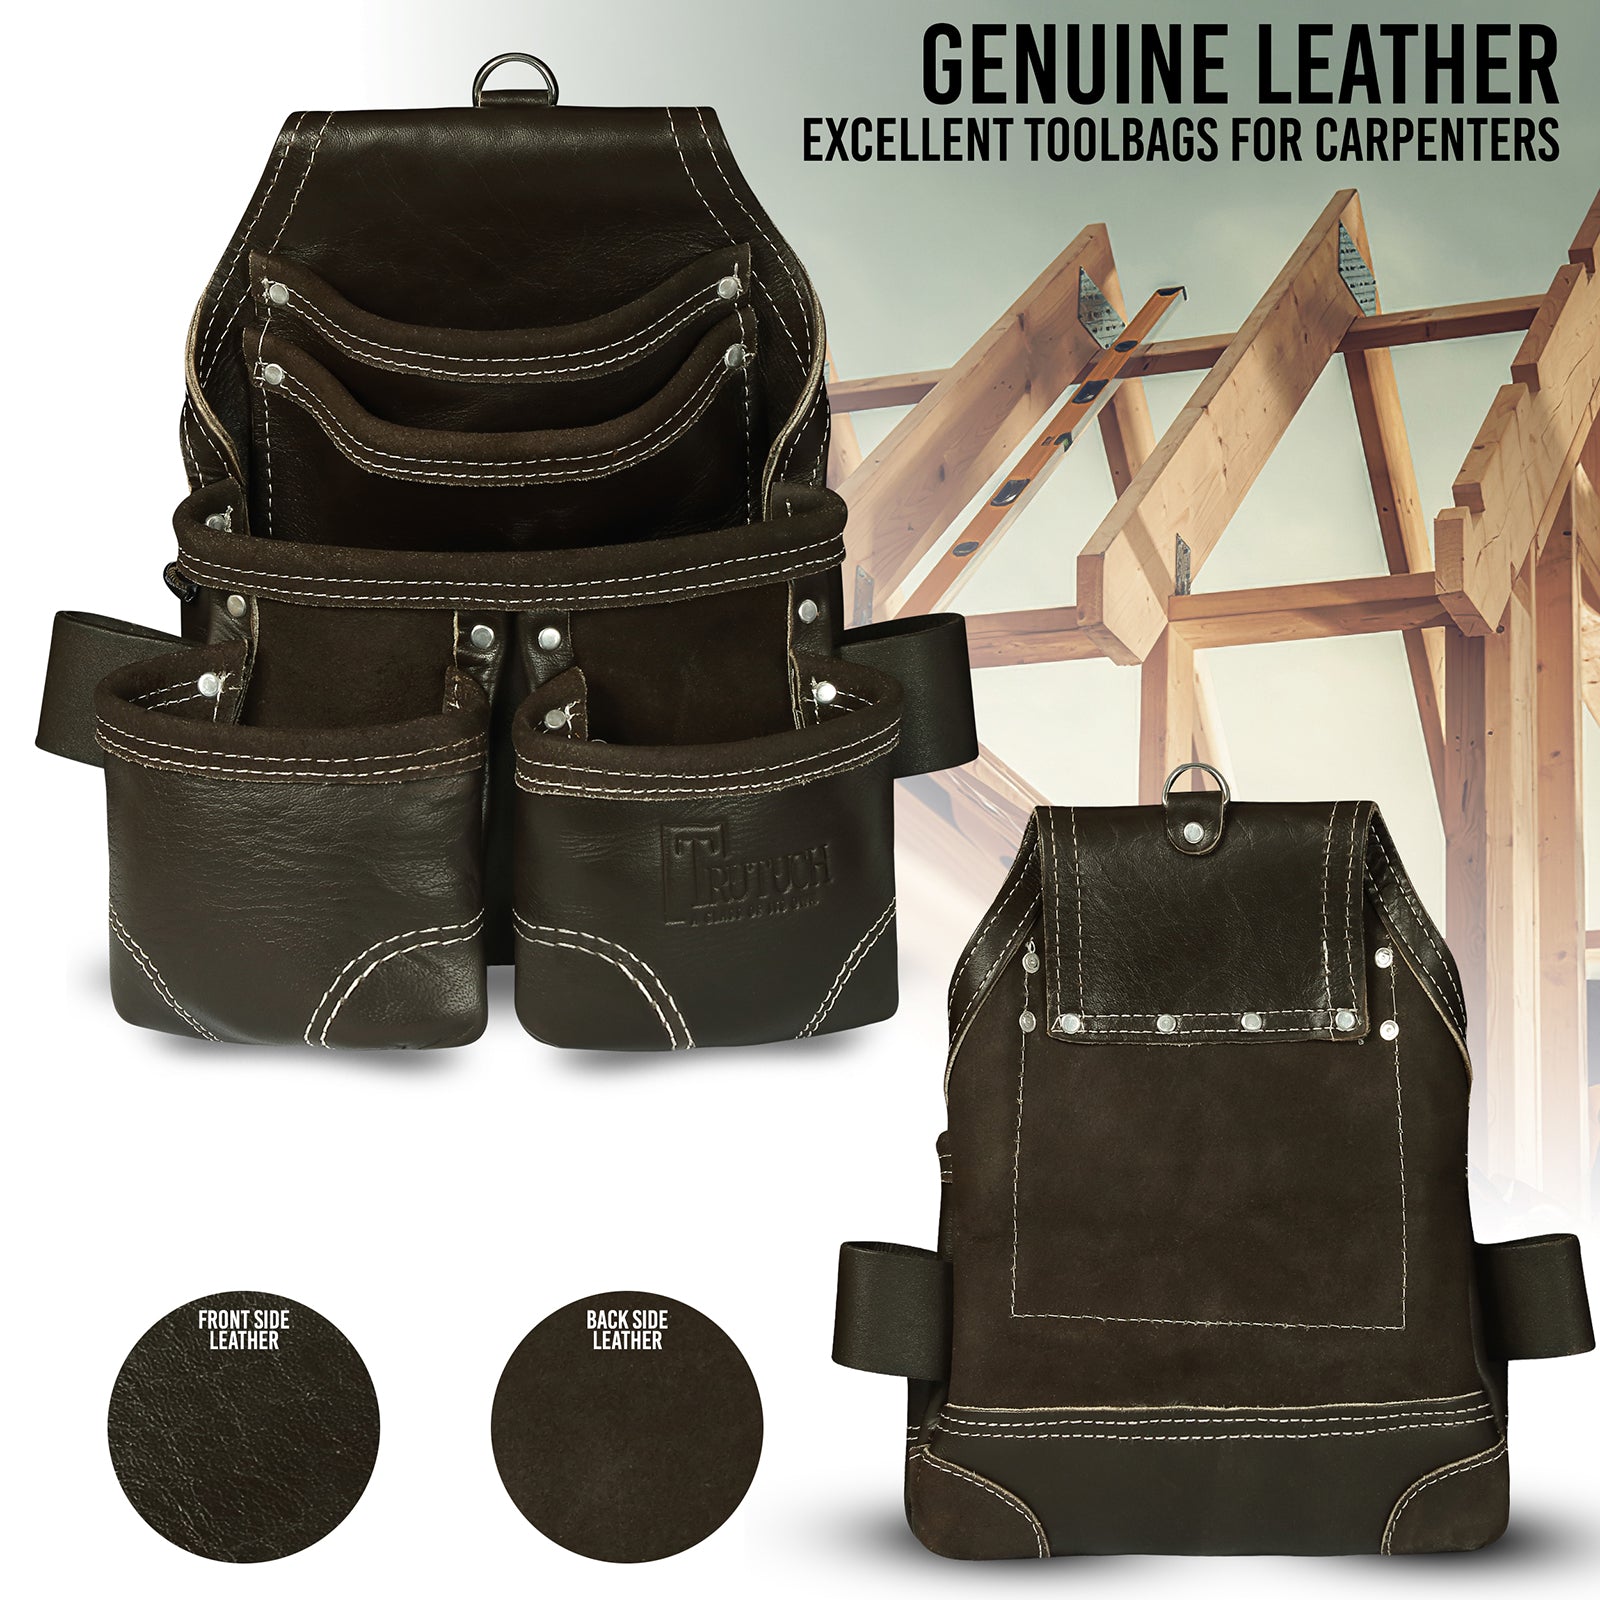 Trutuch Leather Carpenter tool Pouch With Belt, Double Outer Pockets, Chocolate Color, TT-200-P-710-B